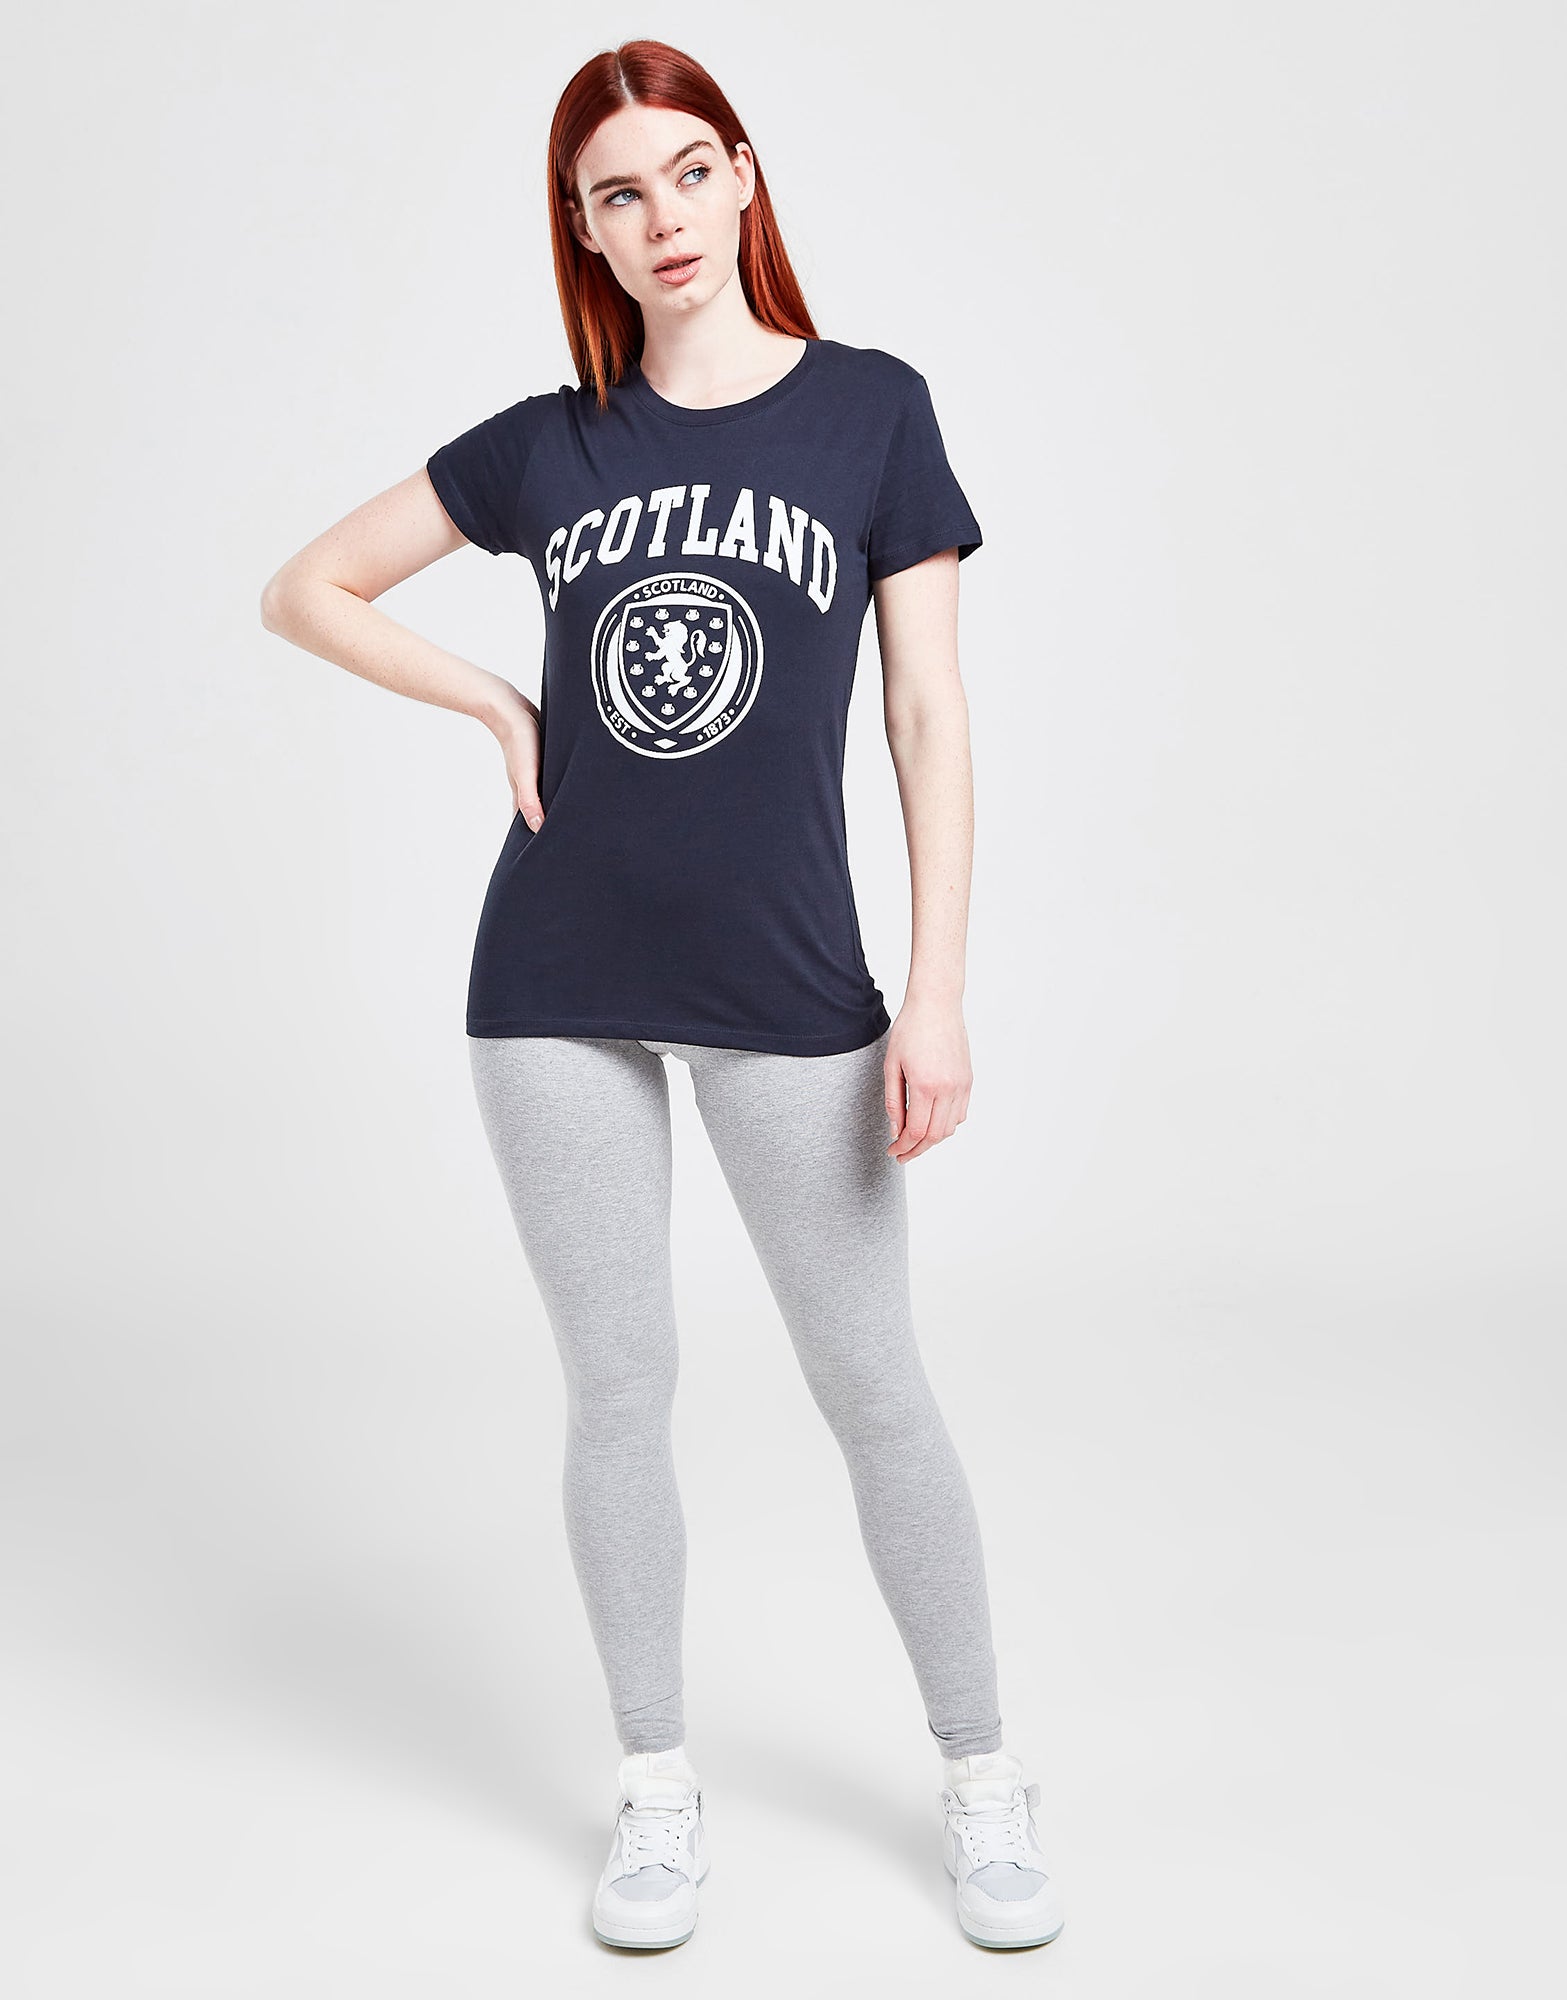 Official Team Scotland Womens Flag and Badge T-Shirt - Navy - The World Football Store